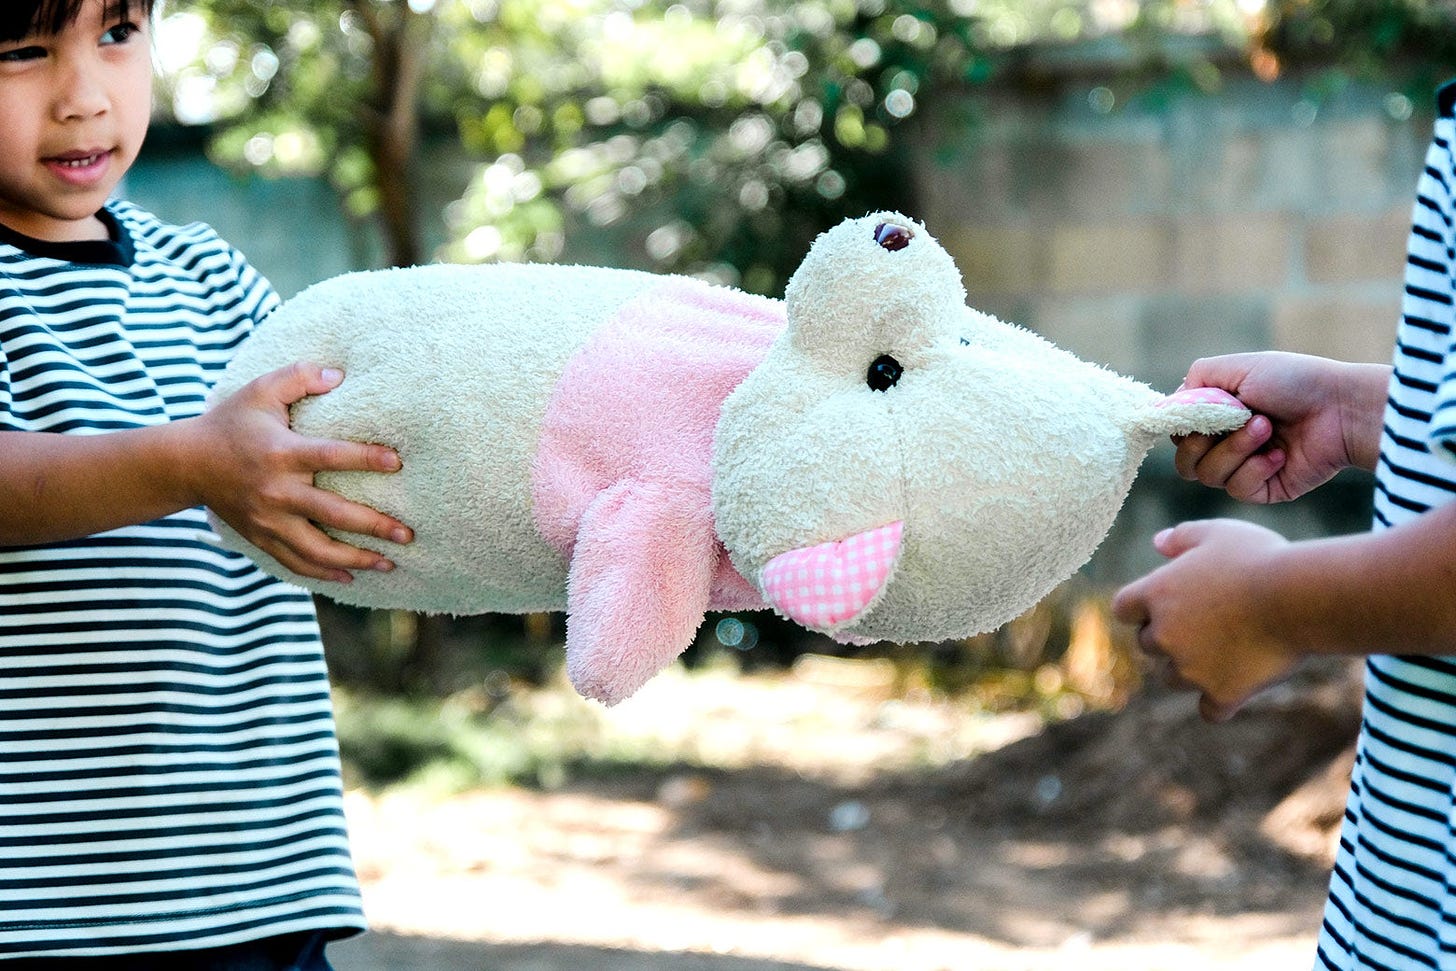 Two young children pull in opposite directions on a teddy bear. 